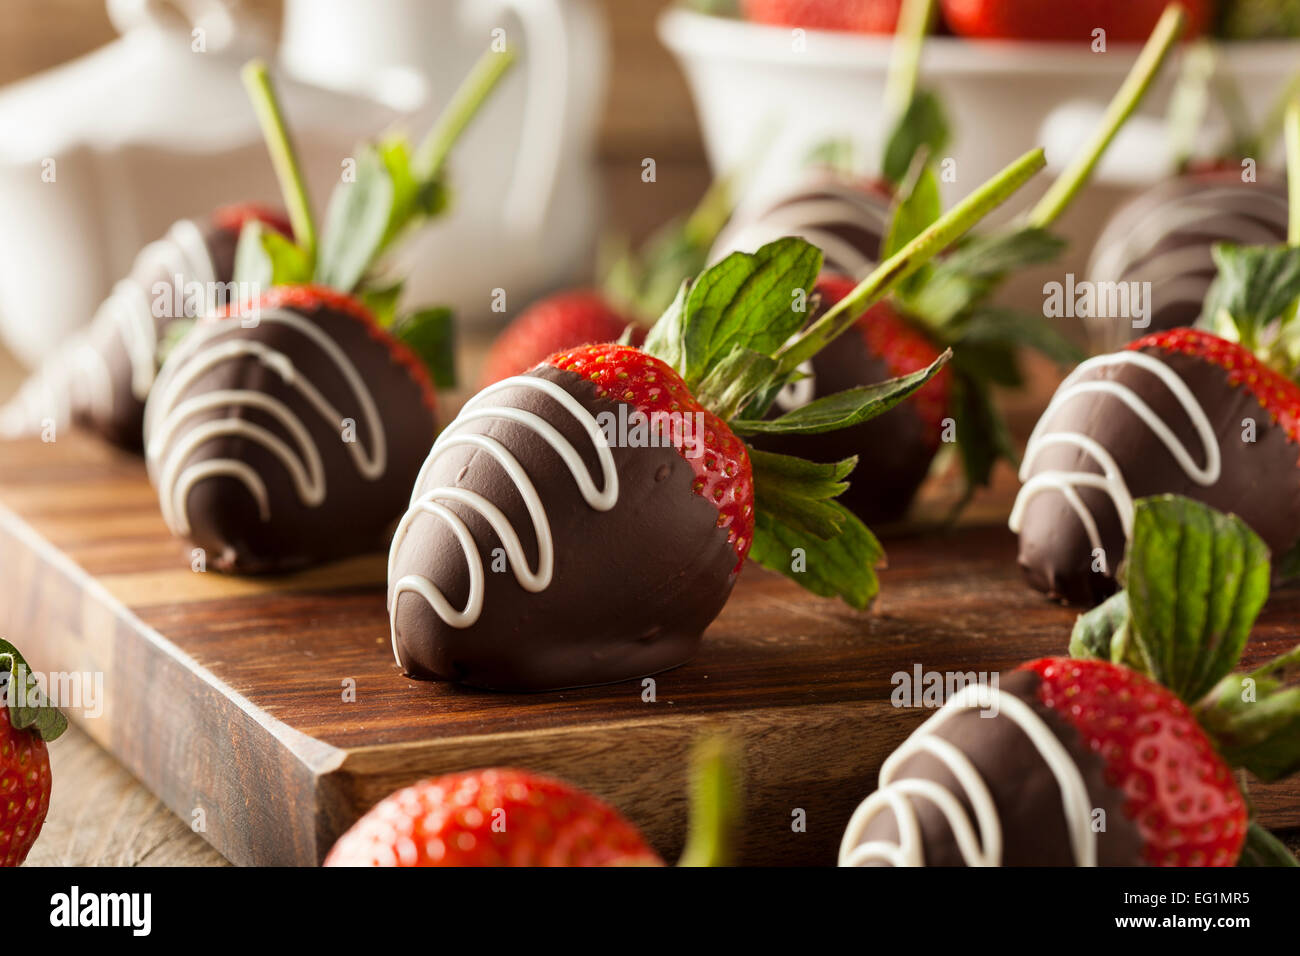 Homemade Chocolate Dipped Strawberries Ready to Eat Stock Photo